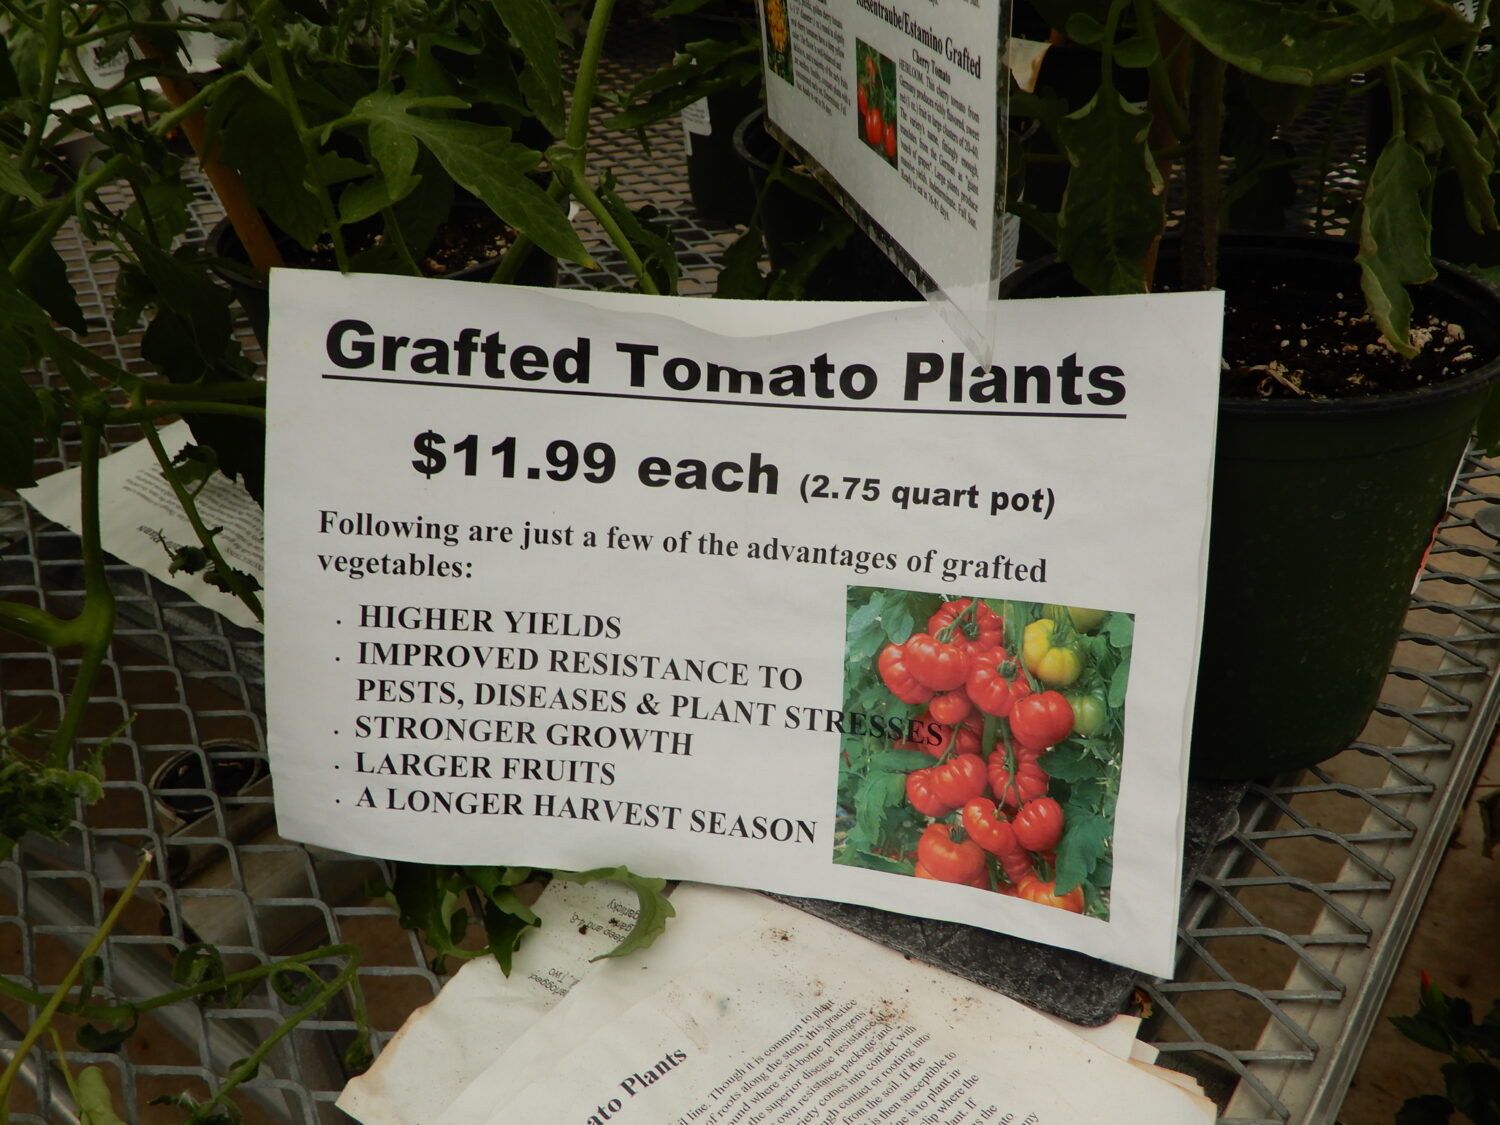 Wedel’s uses plant benefit messaging to sell higher-margin grafted tomato plants.